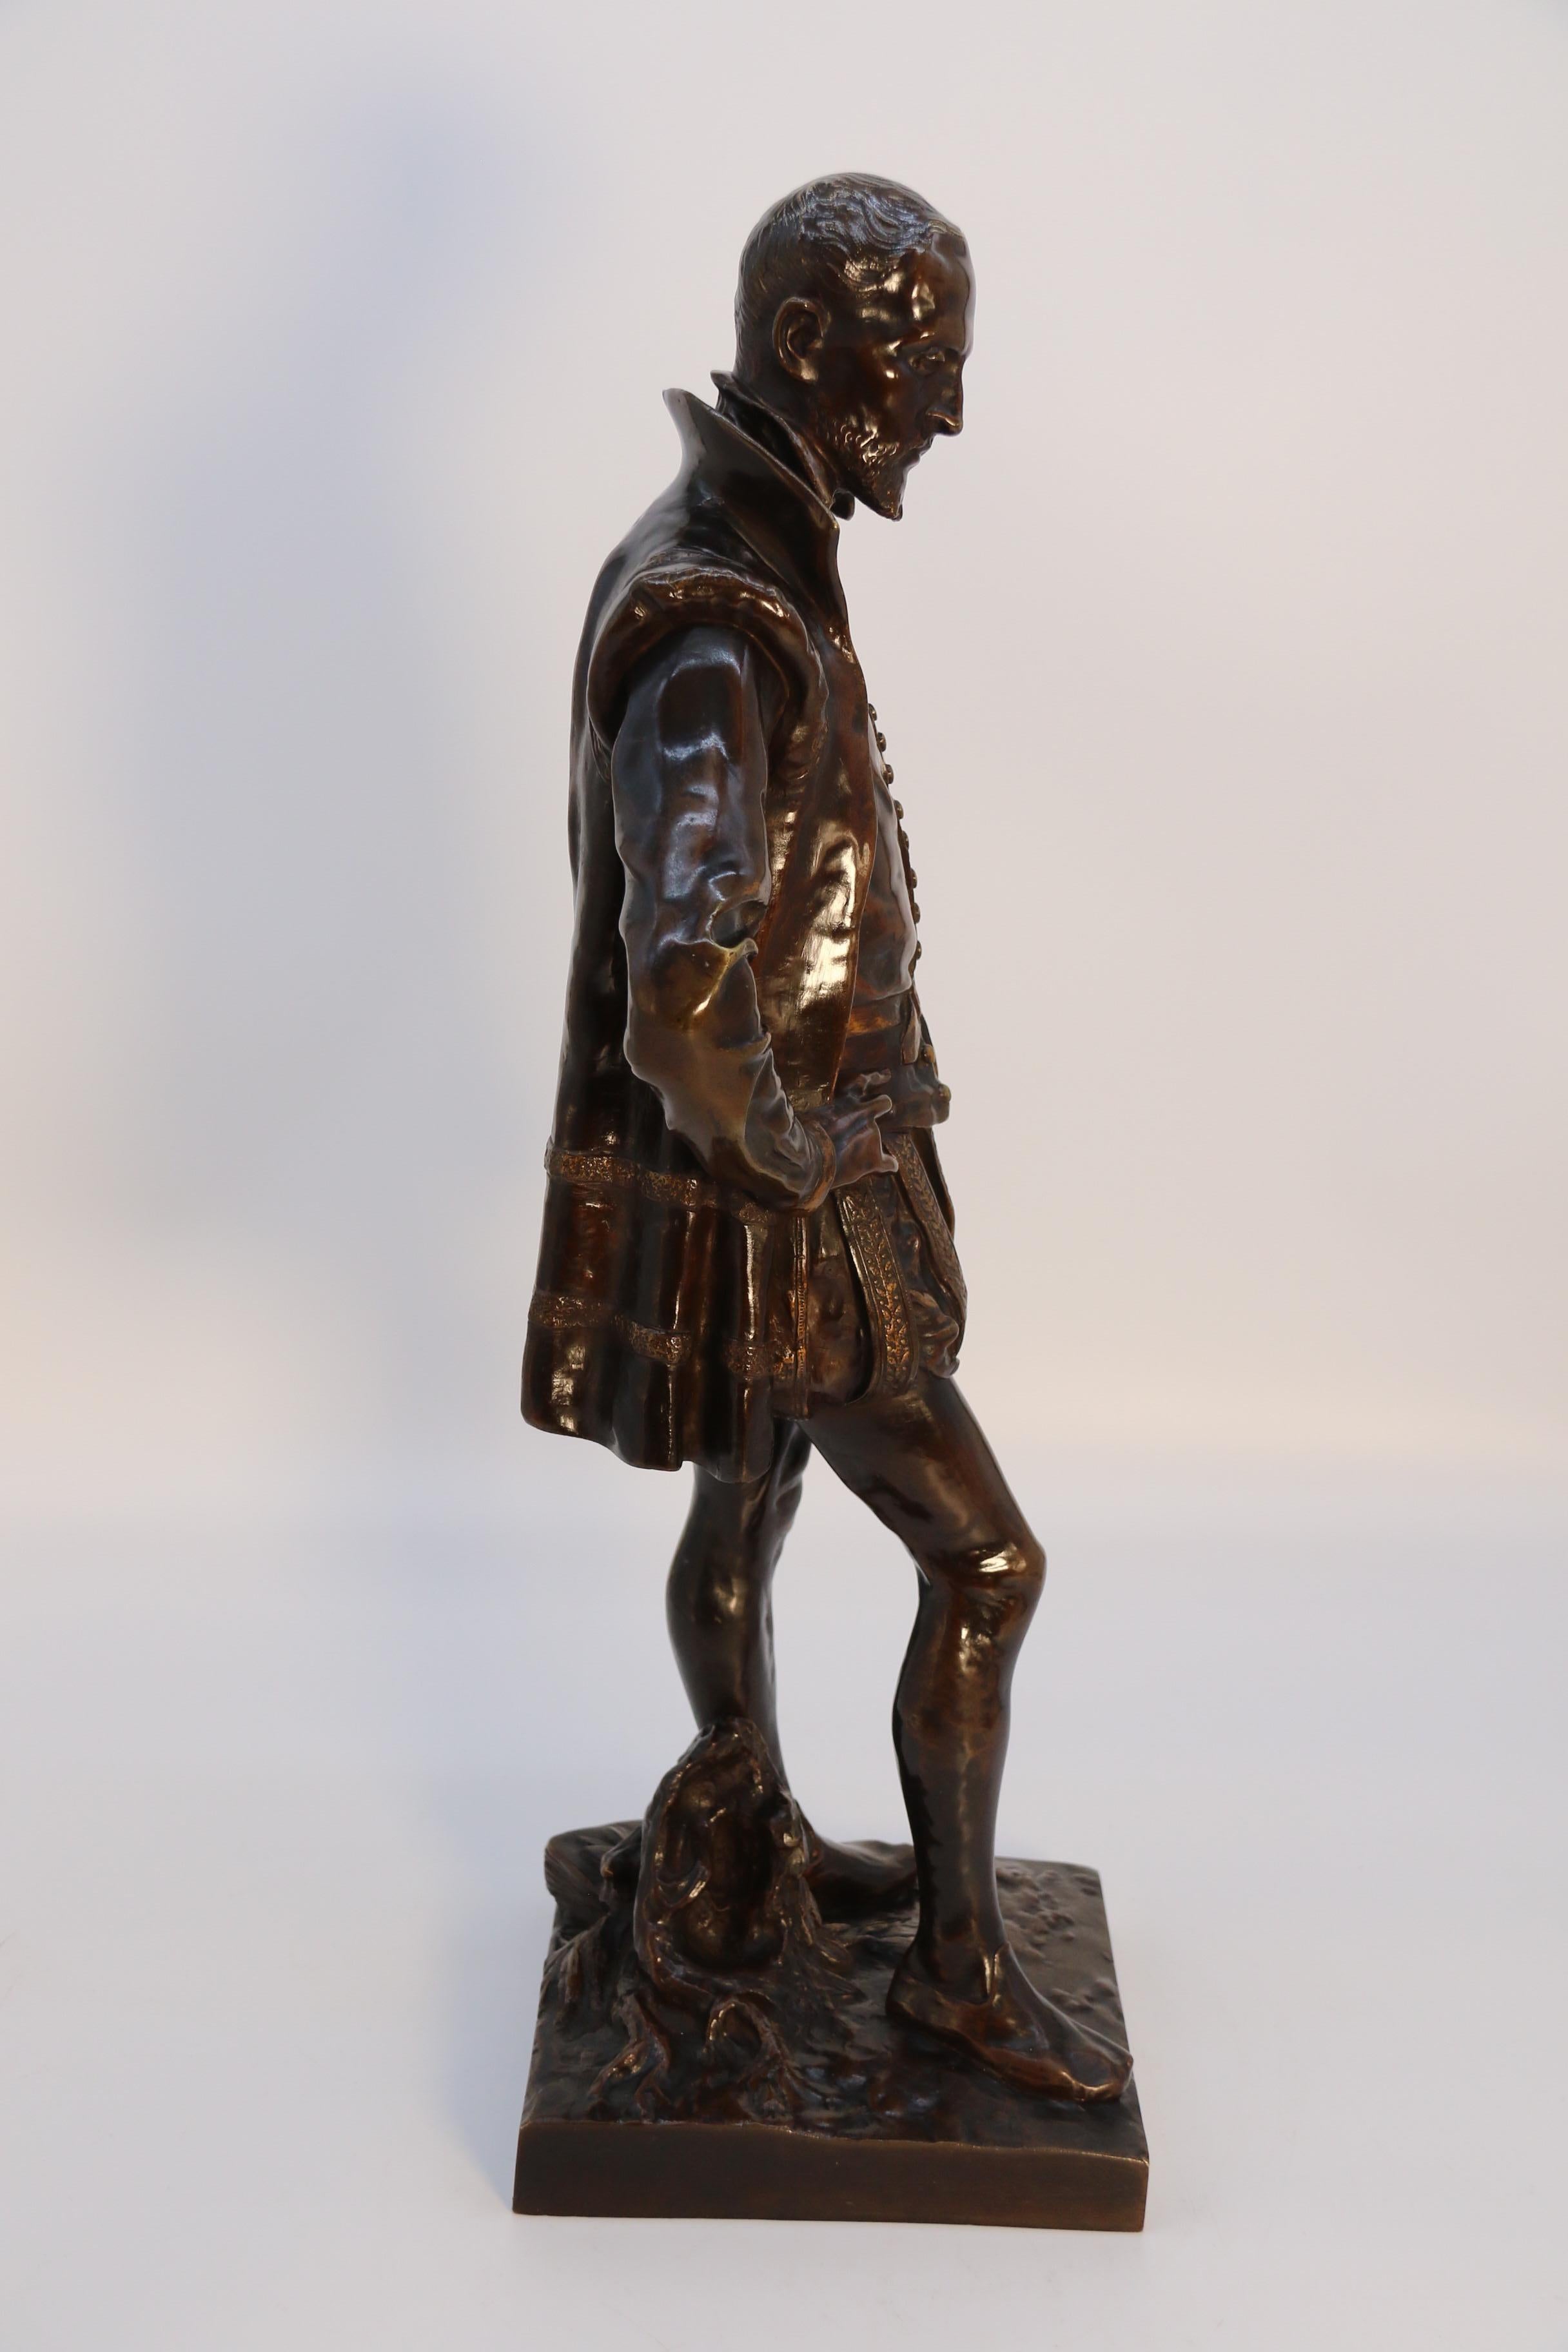 The 19th century bronze study of the French poet Joachim de Bellay by L Adolphe en vente 1